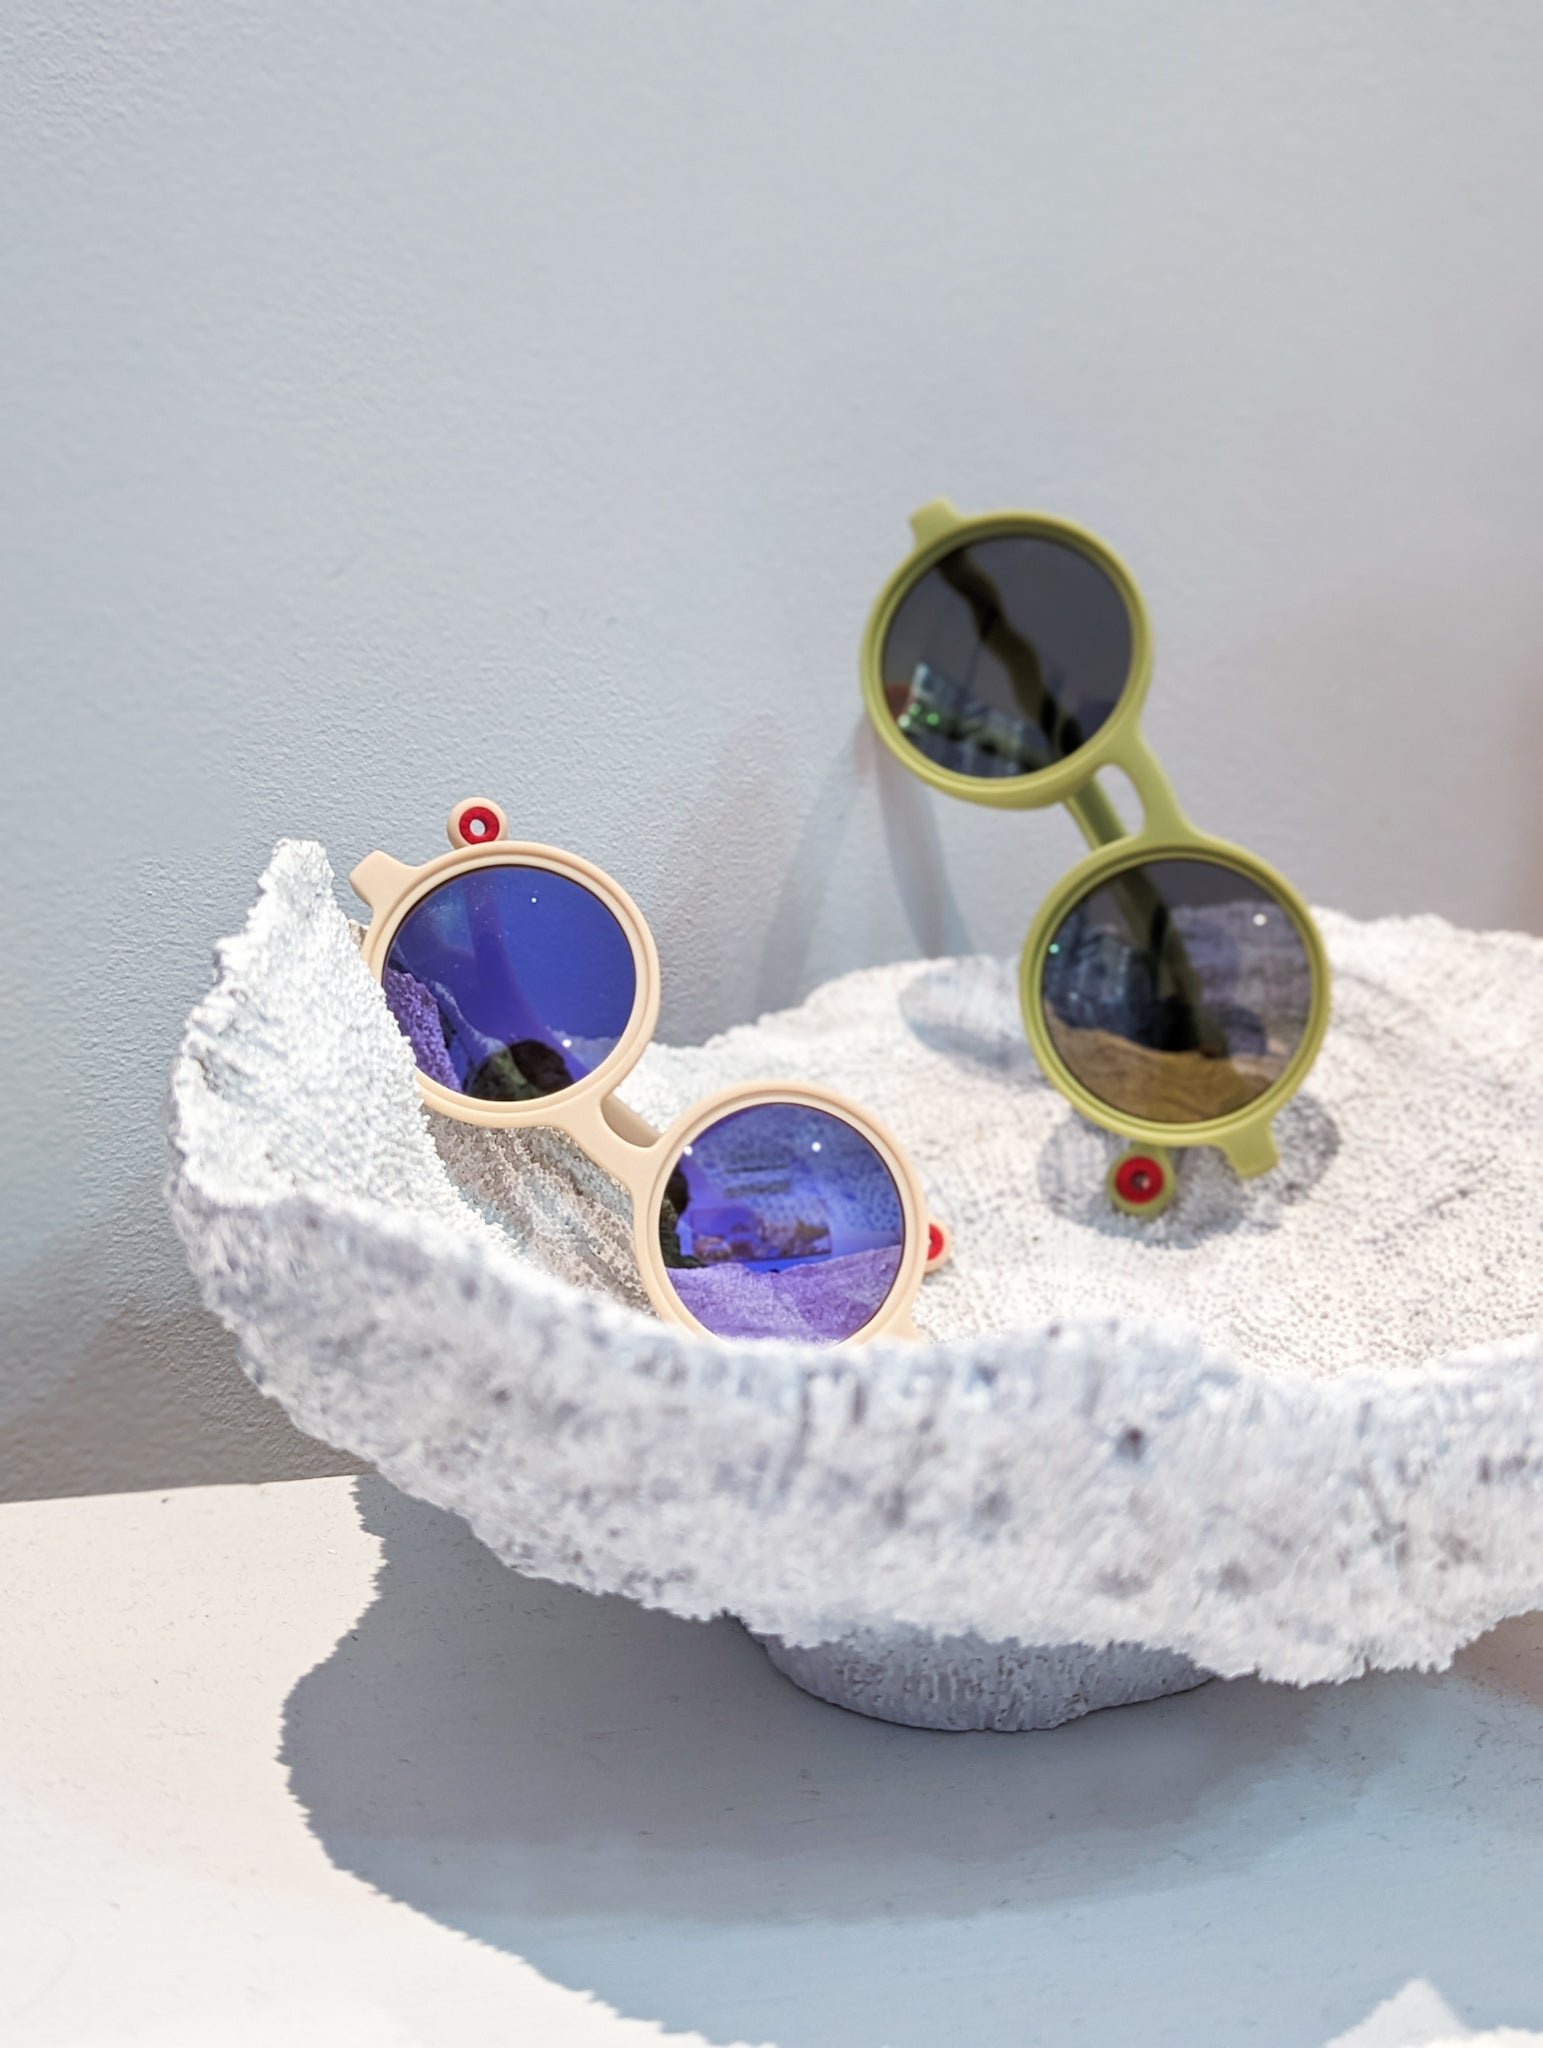 Two Pairs of BB Sunnies in a bowl. Get 2 pairs of BB Sunnies and get a discount with free shipping.